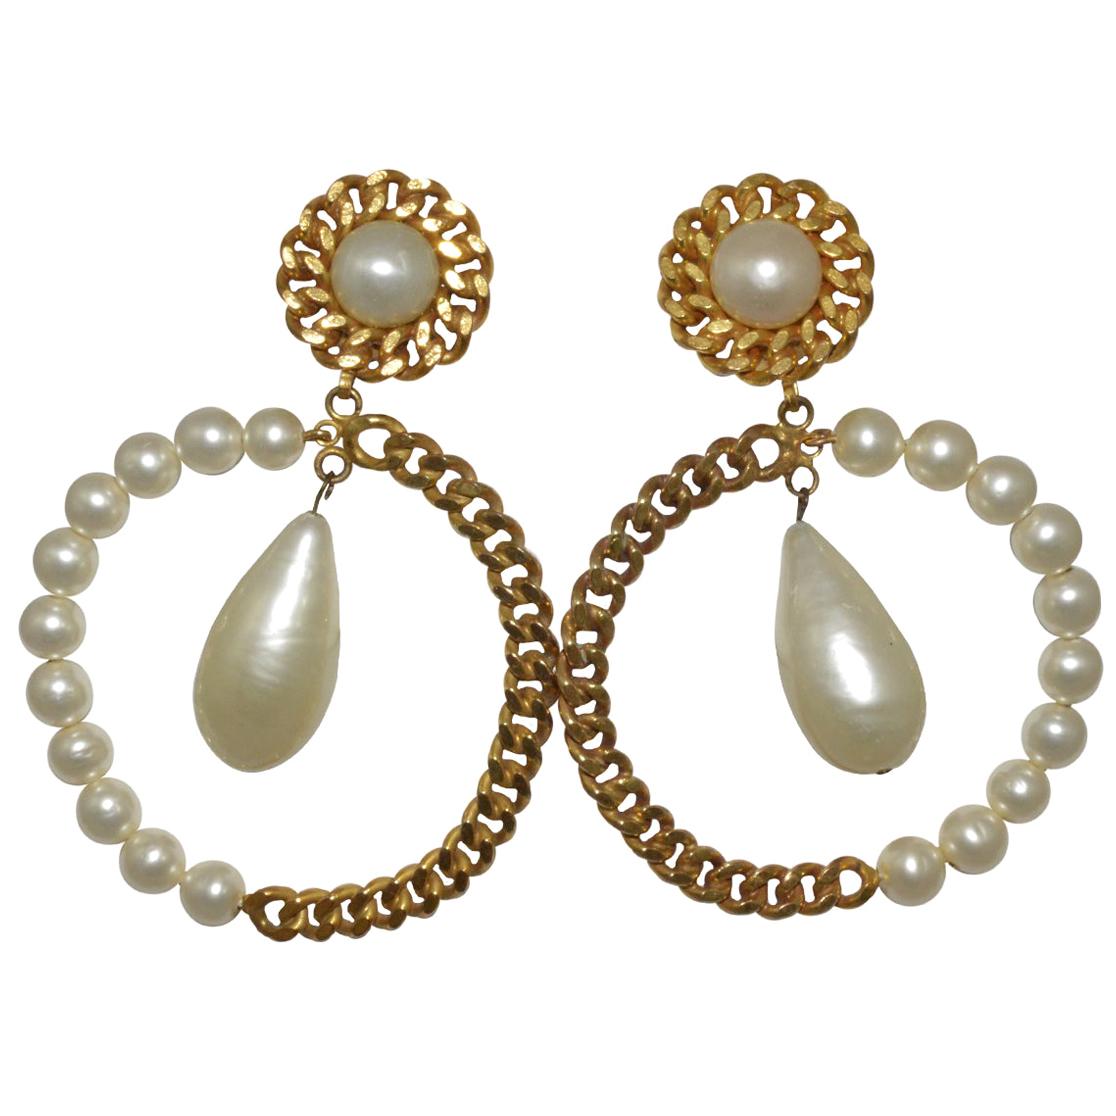 CHANEL, Jewelry, Chanel Earrings 2s Xl Gold Pearl Large